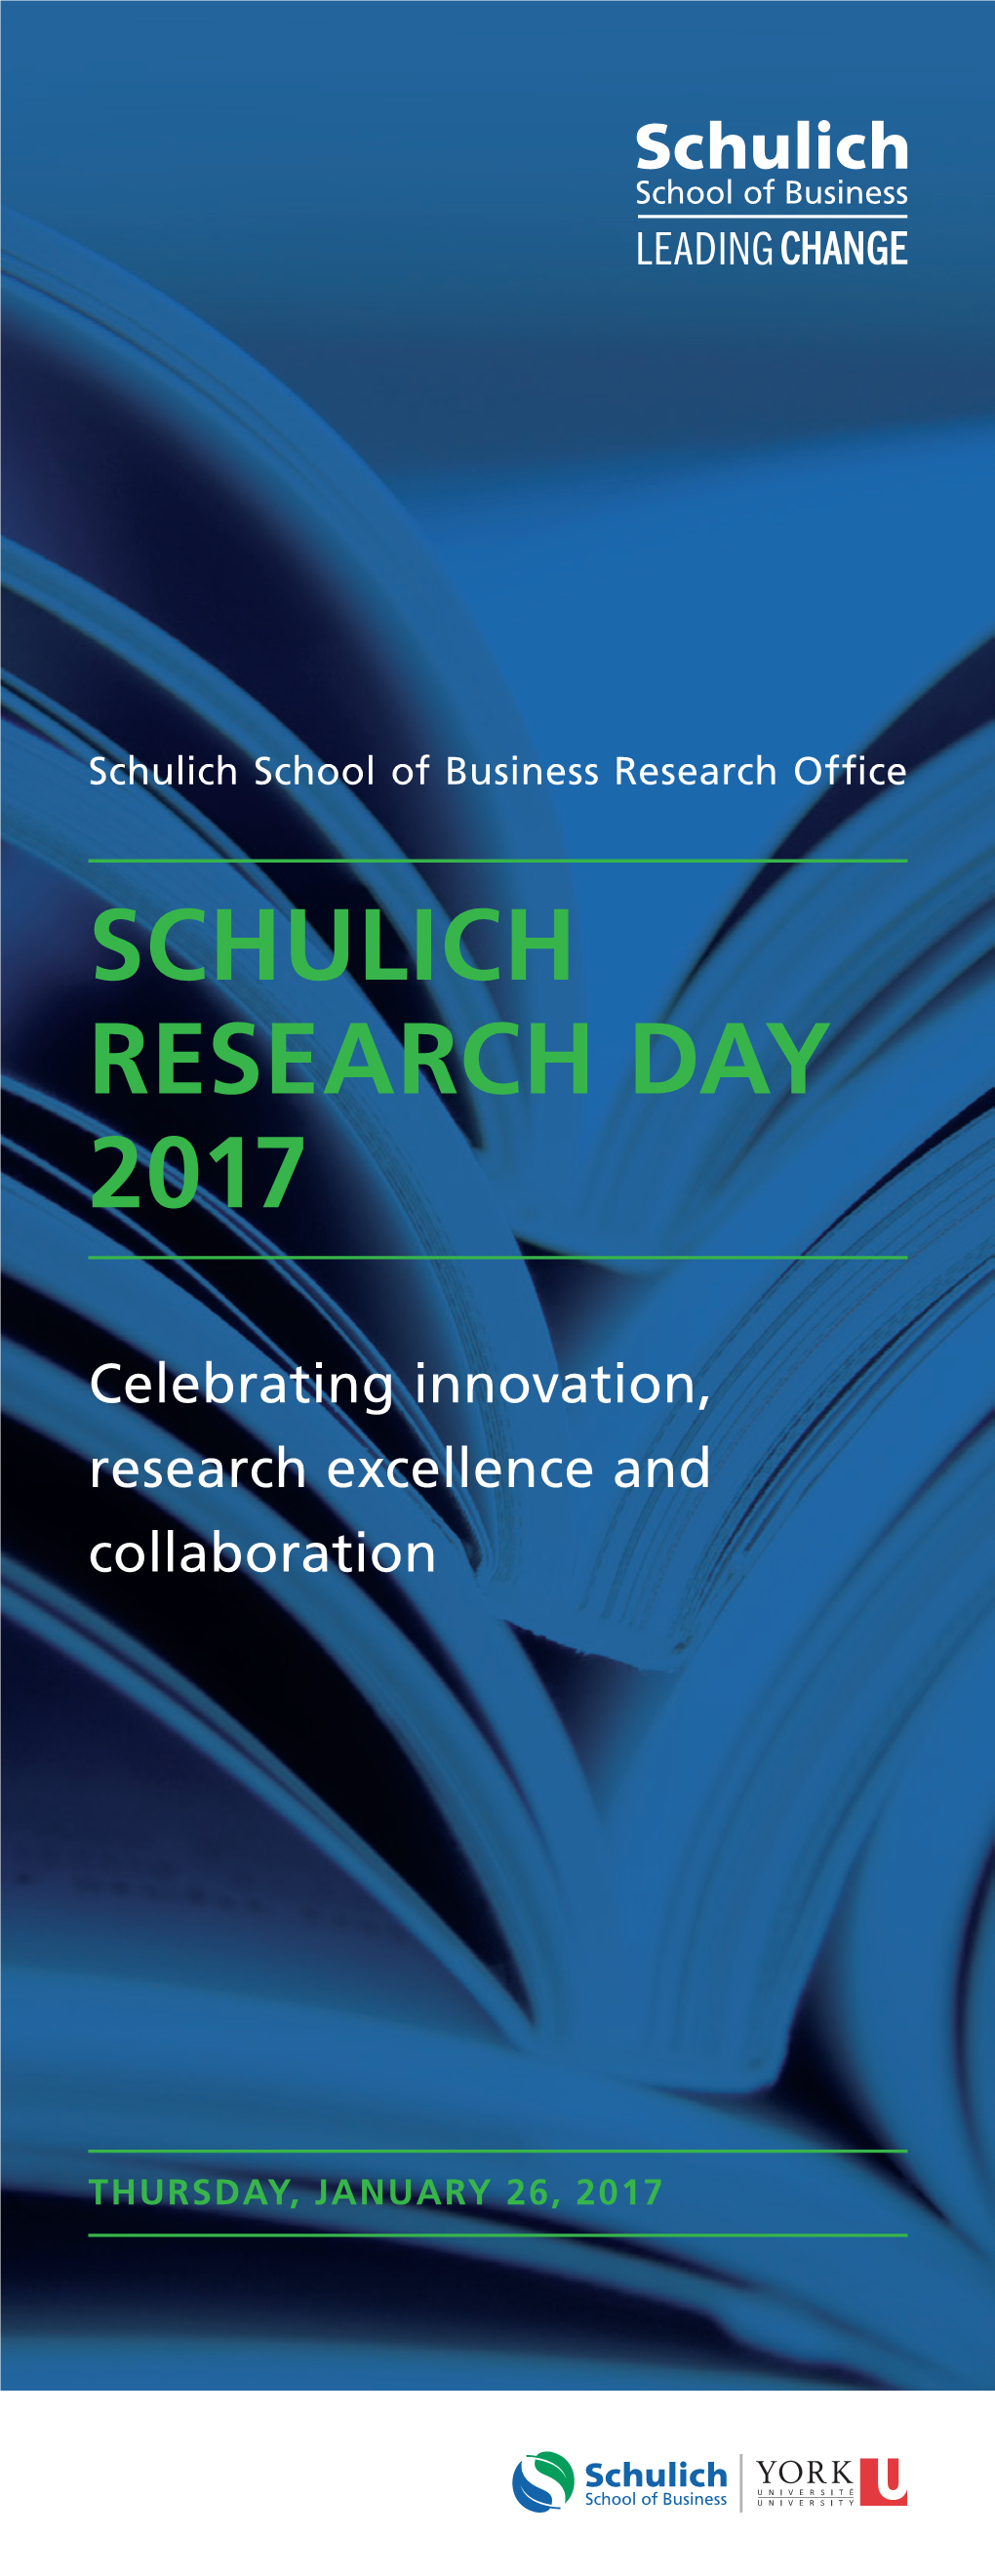 Schulich Research Day 2017